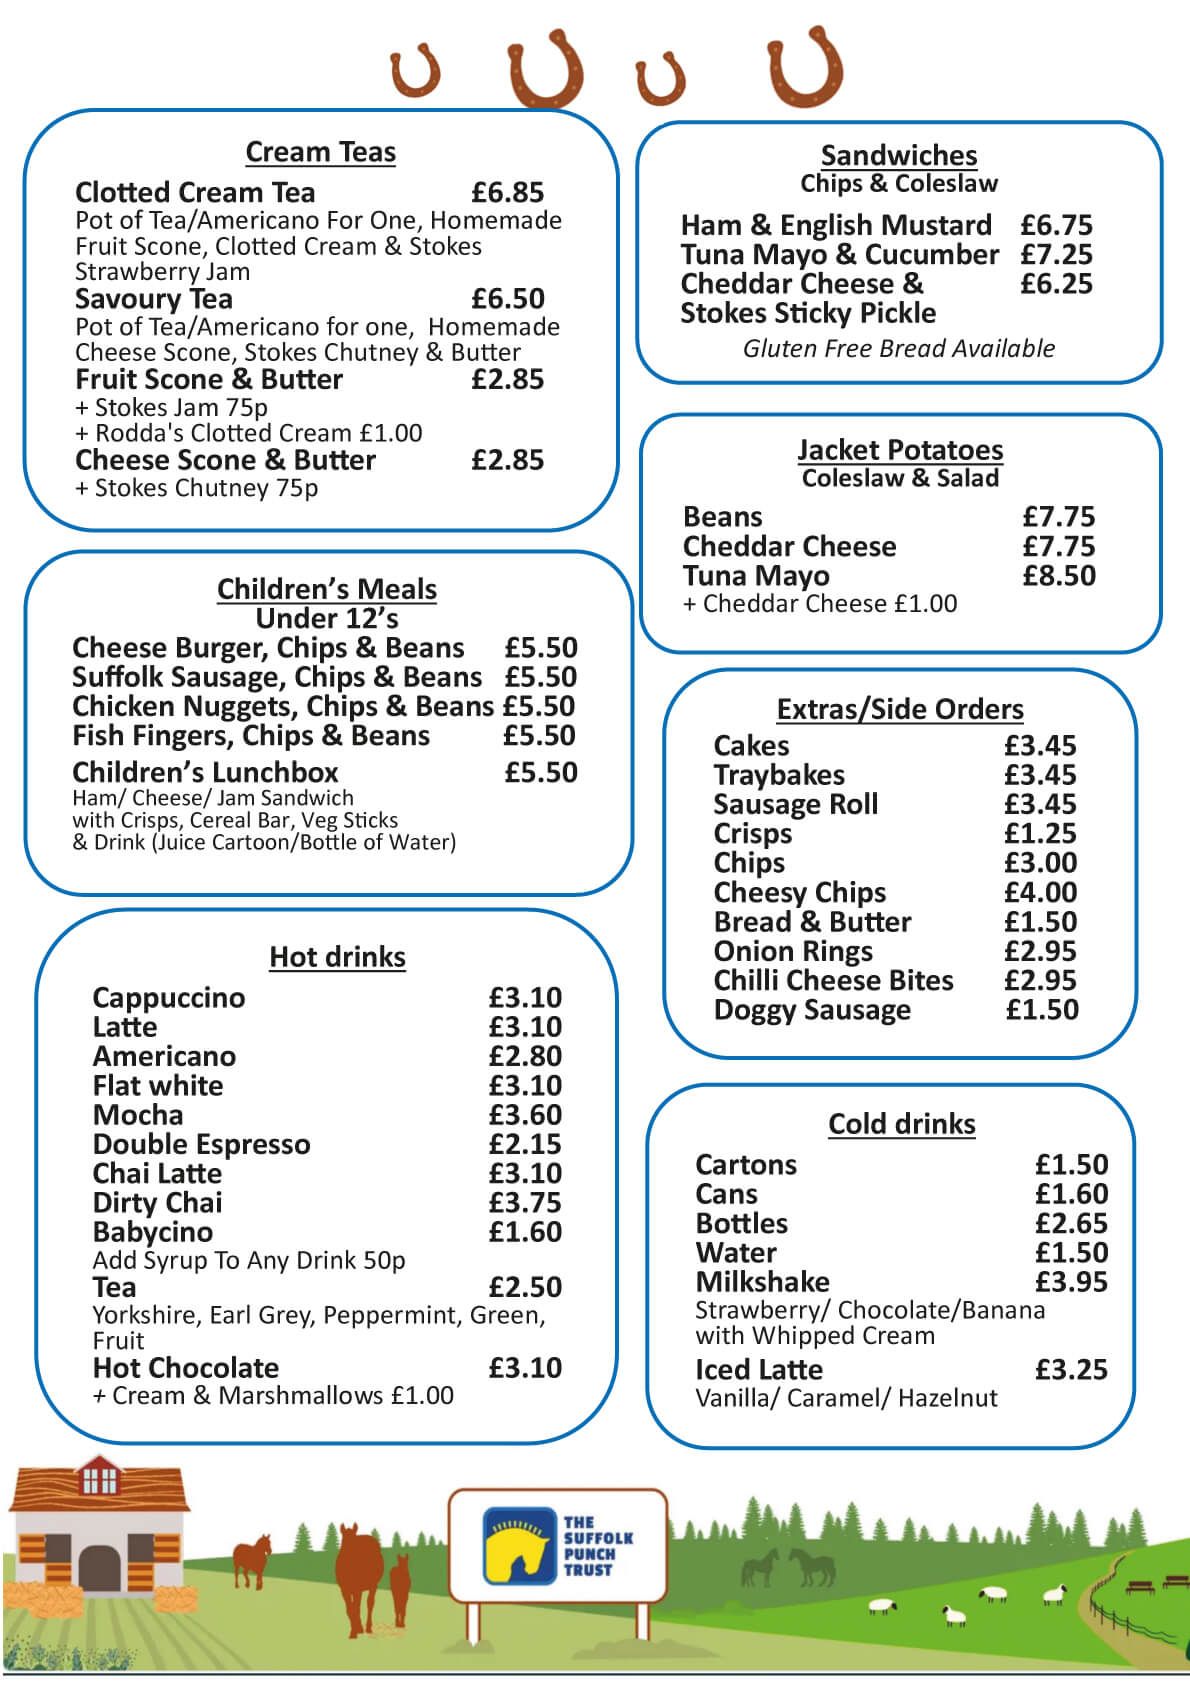 The Suffolk Punch Trust Menu, with cream teas, kids meals, hot drinks, sandwiches, jacket potatoes, chips and cold drinks